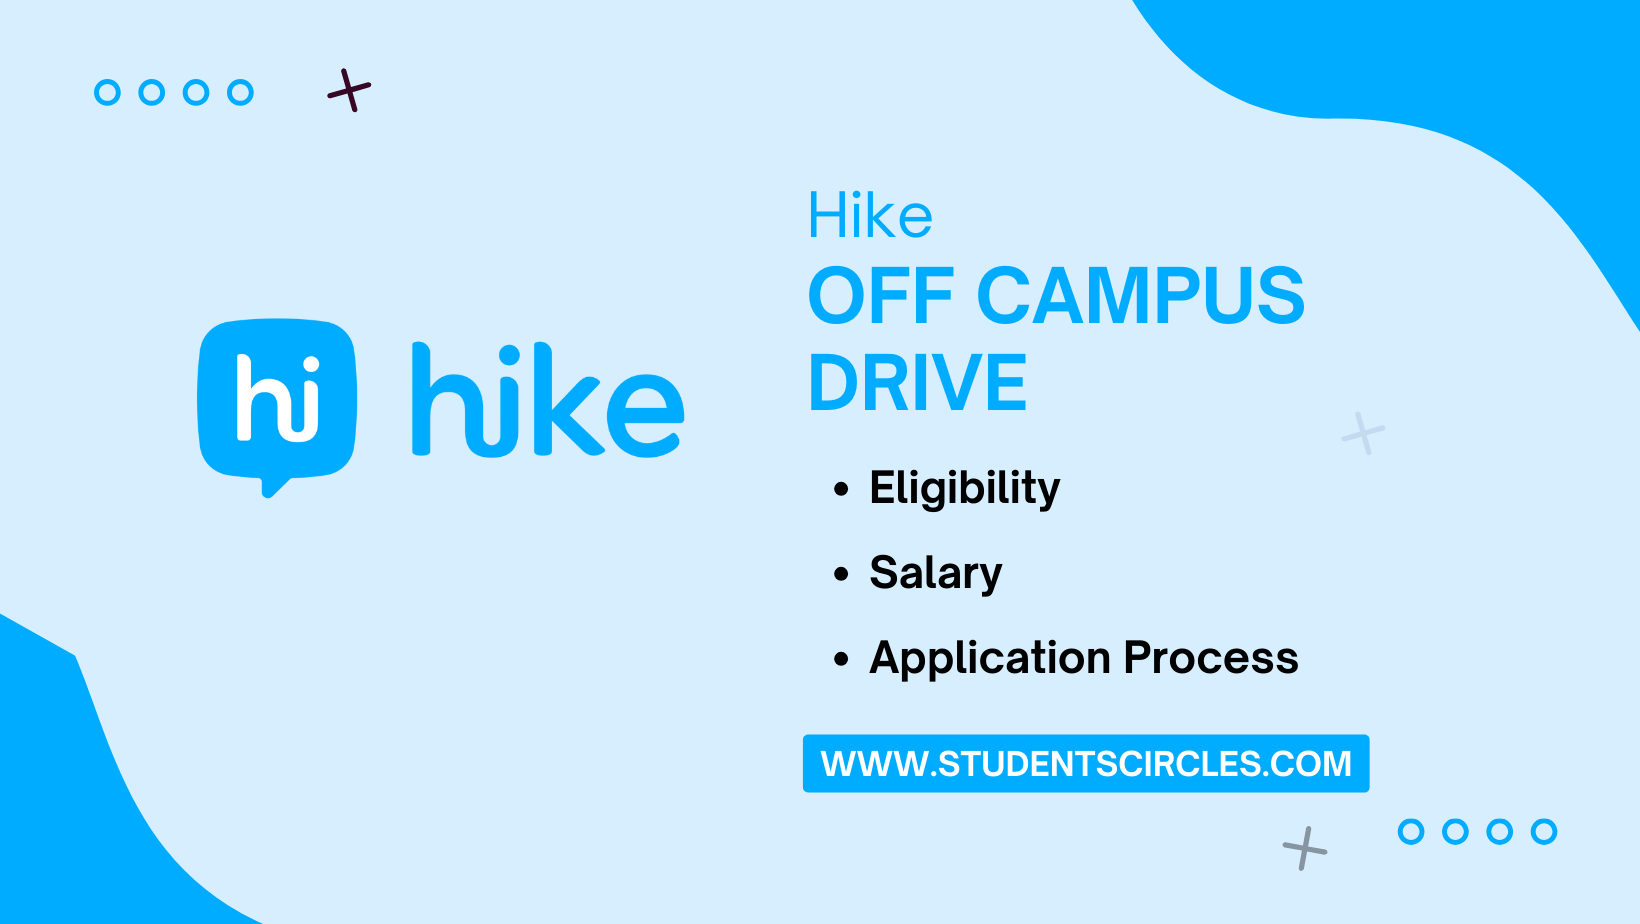 Hike Off Campus Drive